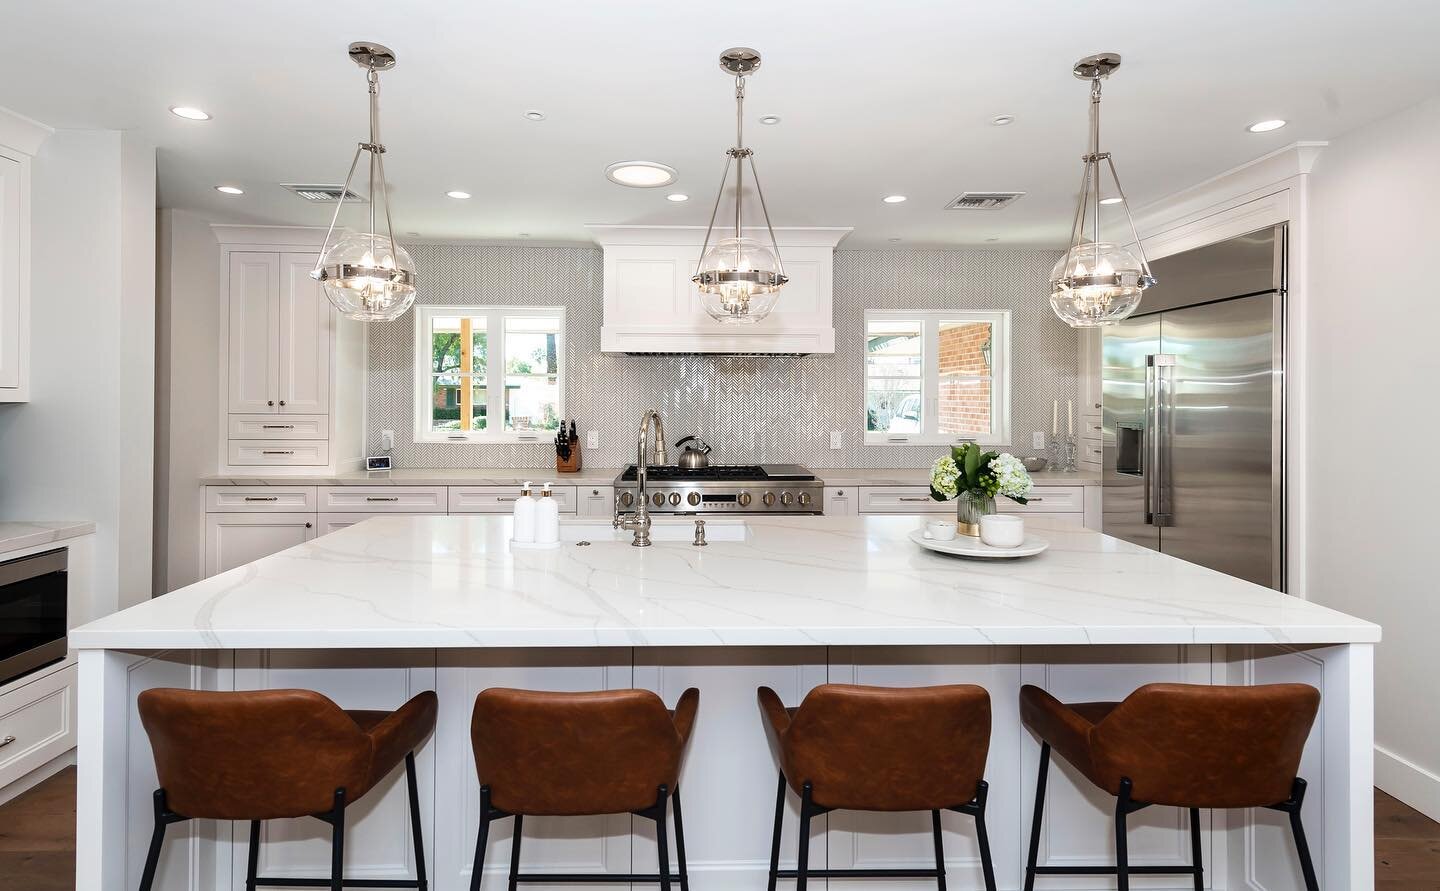 White kitchens are here to stay! And this beauty came out fabulous!!! Swipe to see the before

Designer @mimibstudio 
Builder @rareformbuilder 

#interiordesign #interiordesigner #remodel #kitchenremodel #beforeandafter #highendhomes #luxuryliving